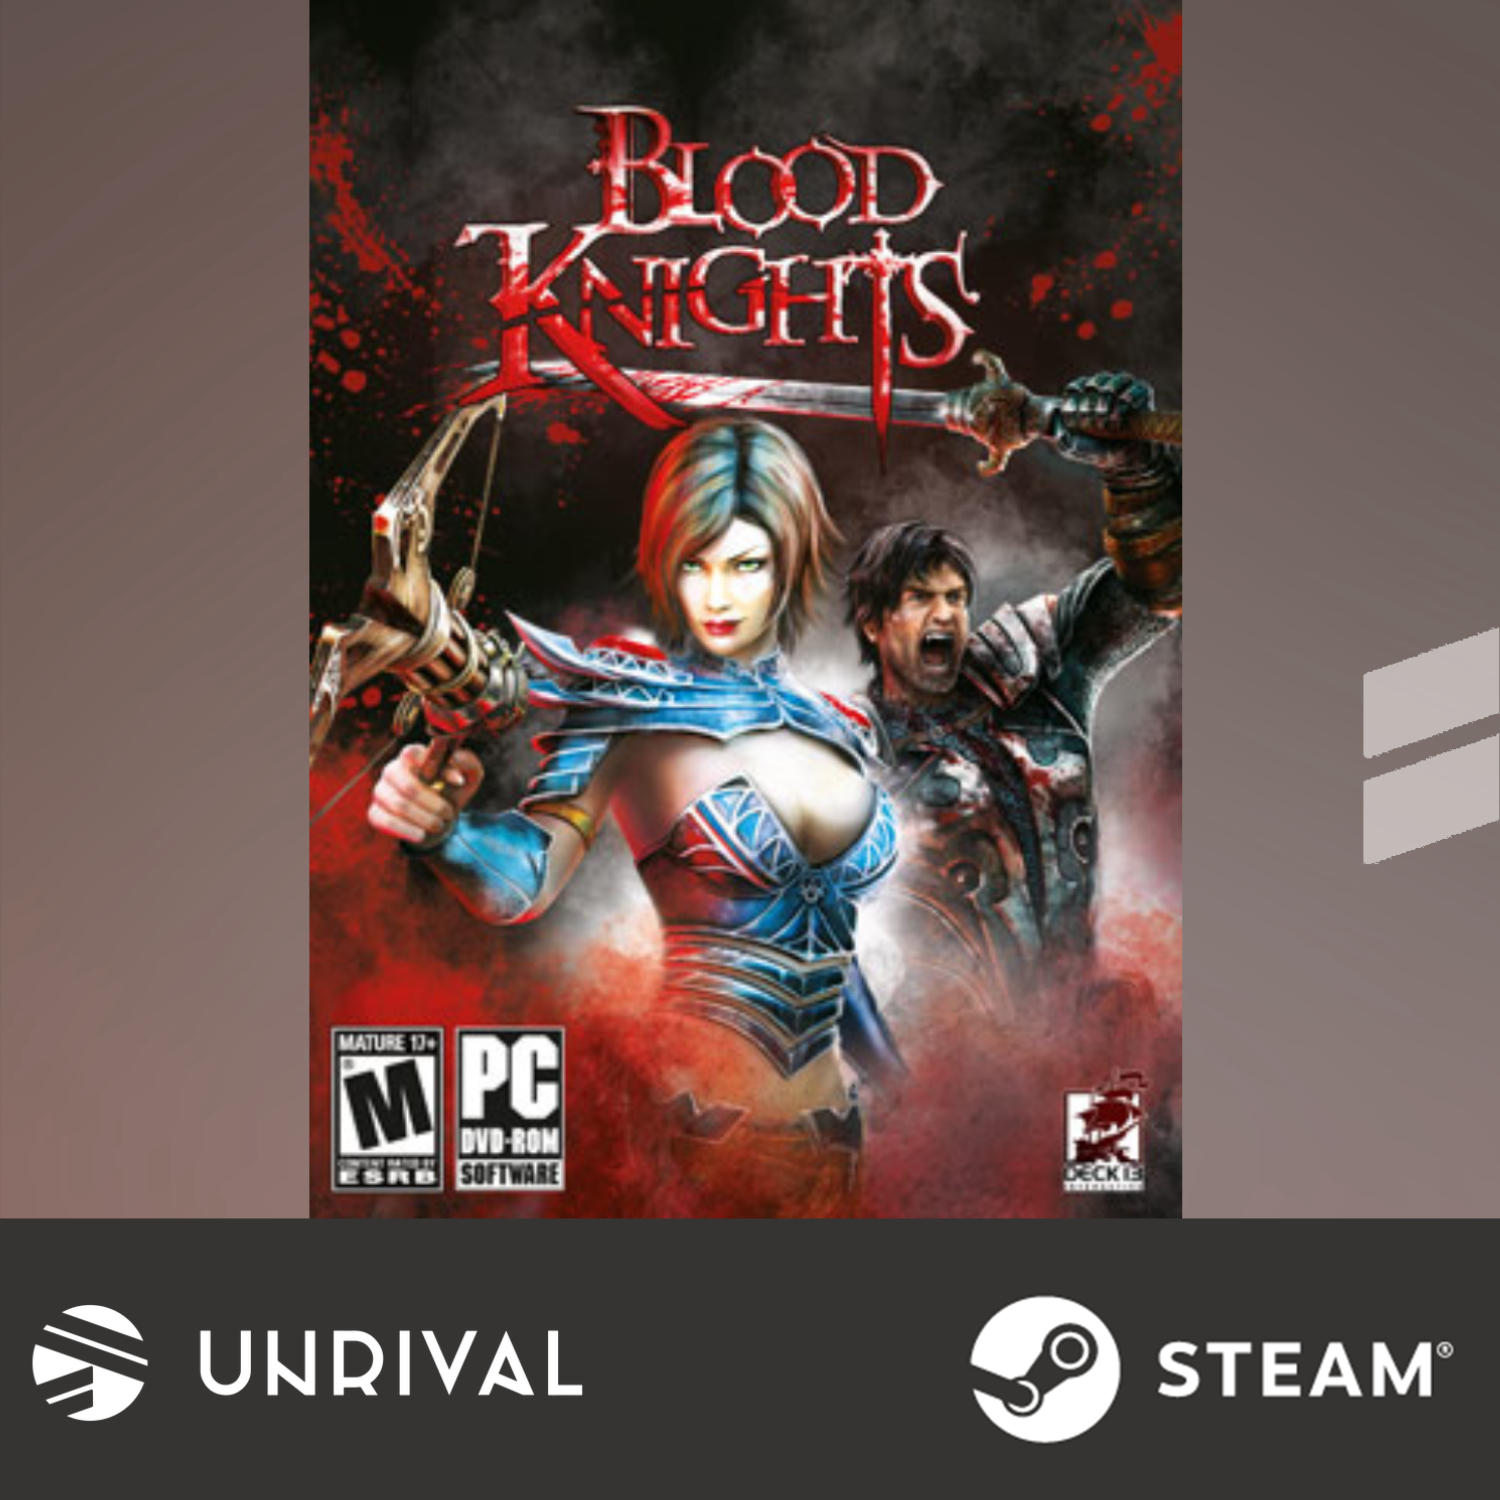 [Hot Sale] Blood Knights PC Digital Download Game (Multiplayer) - Unrival